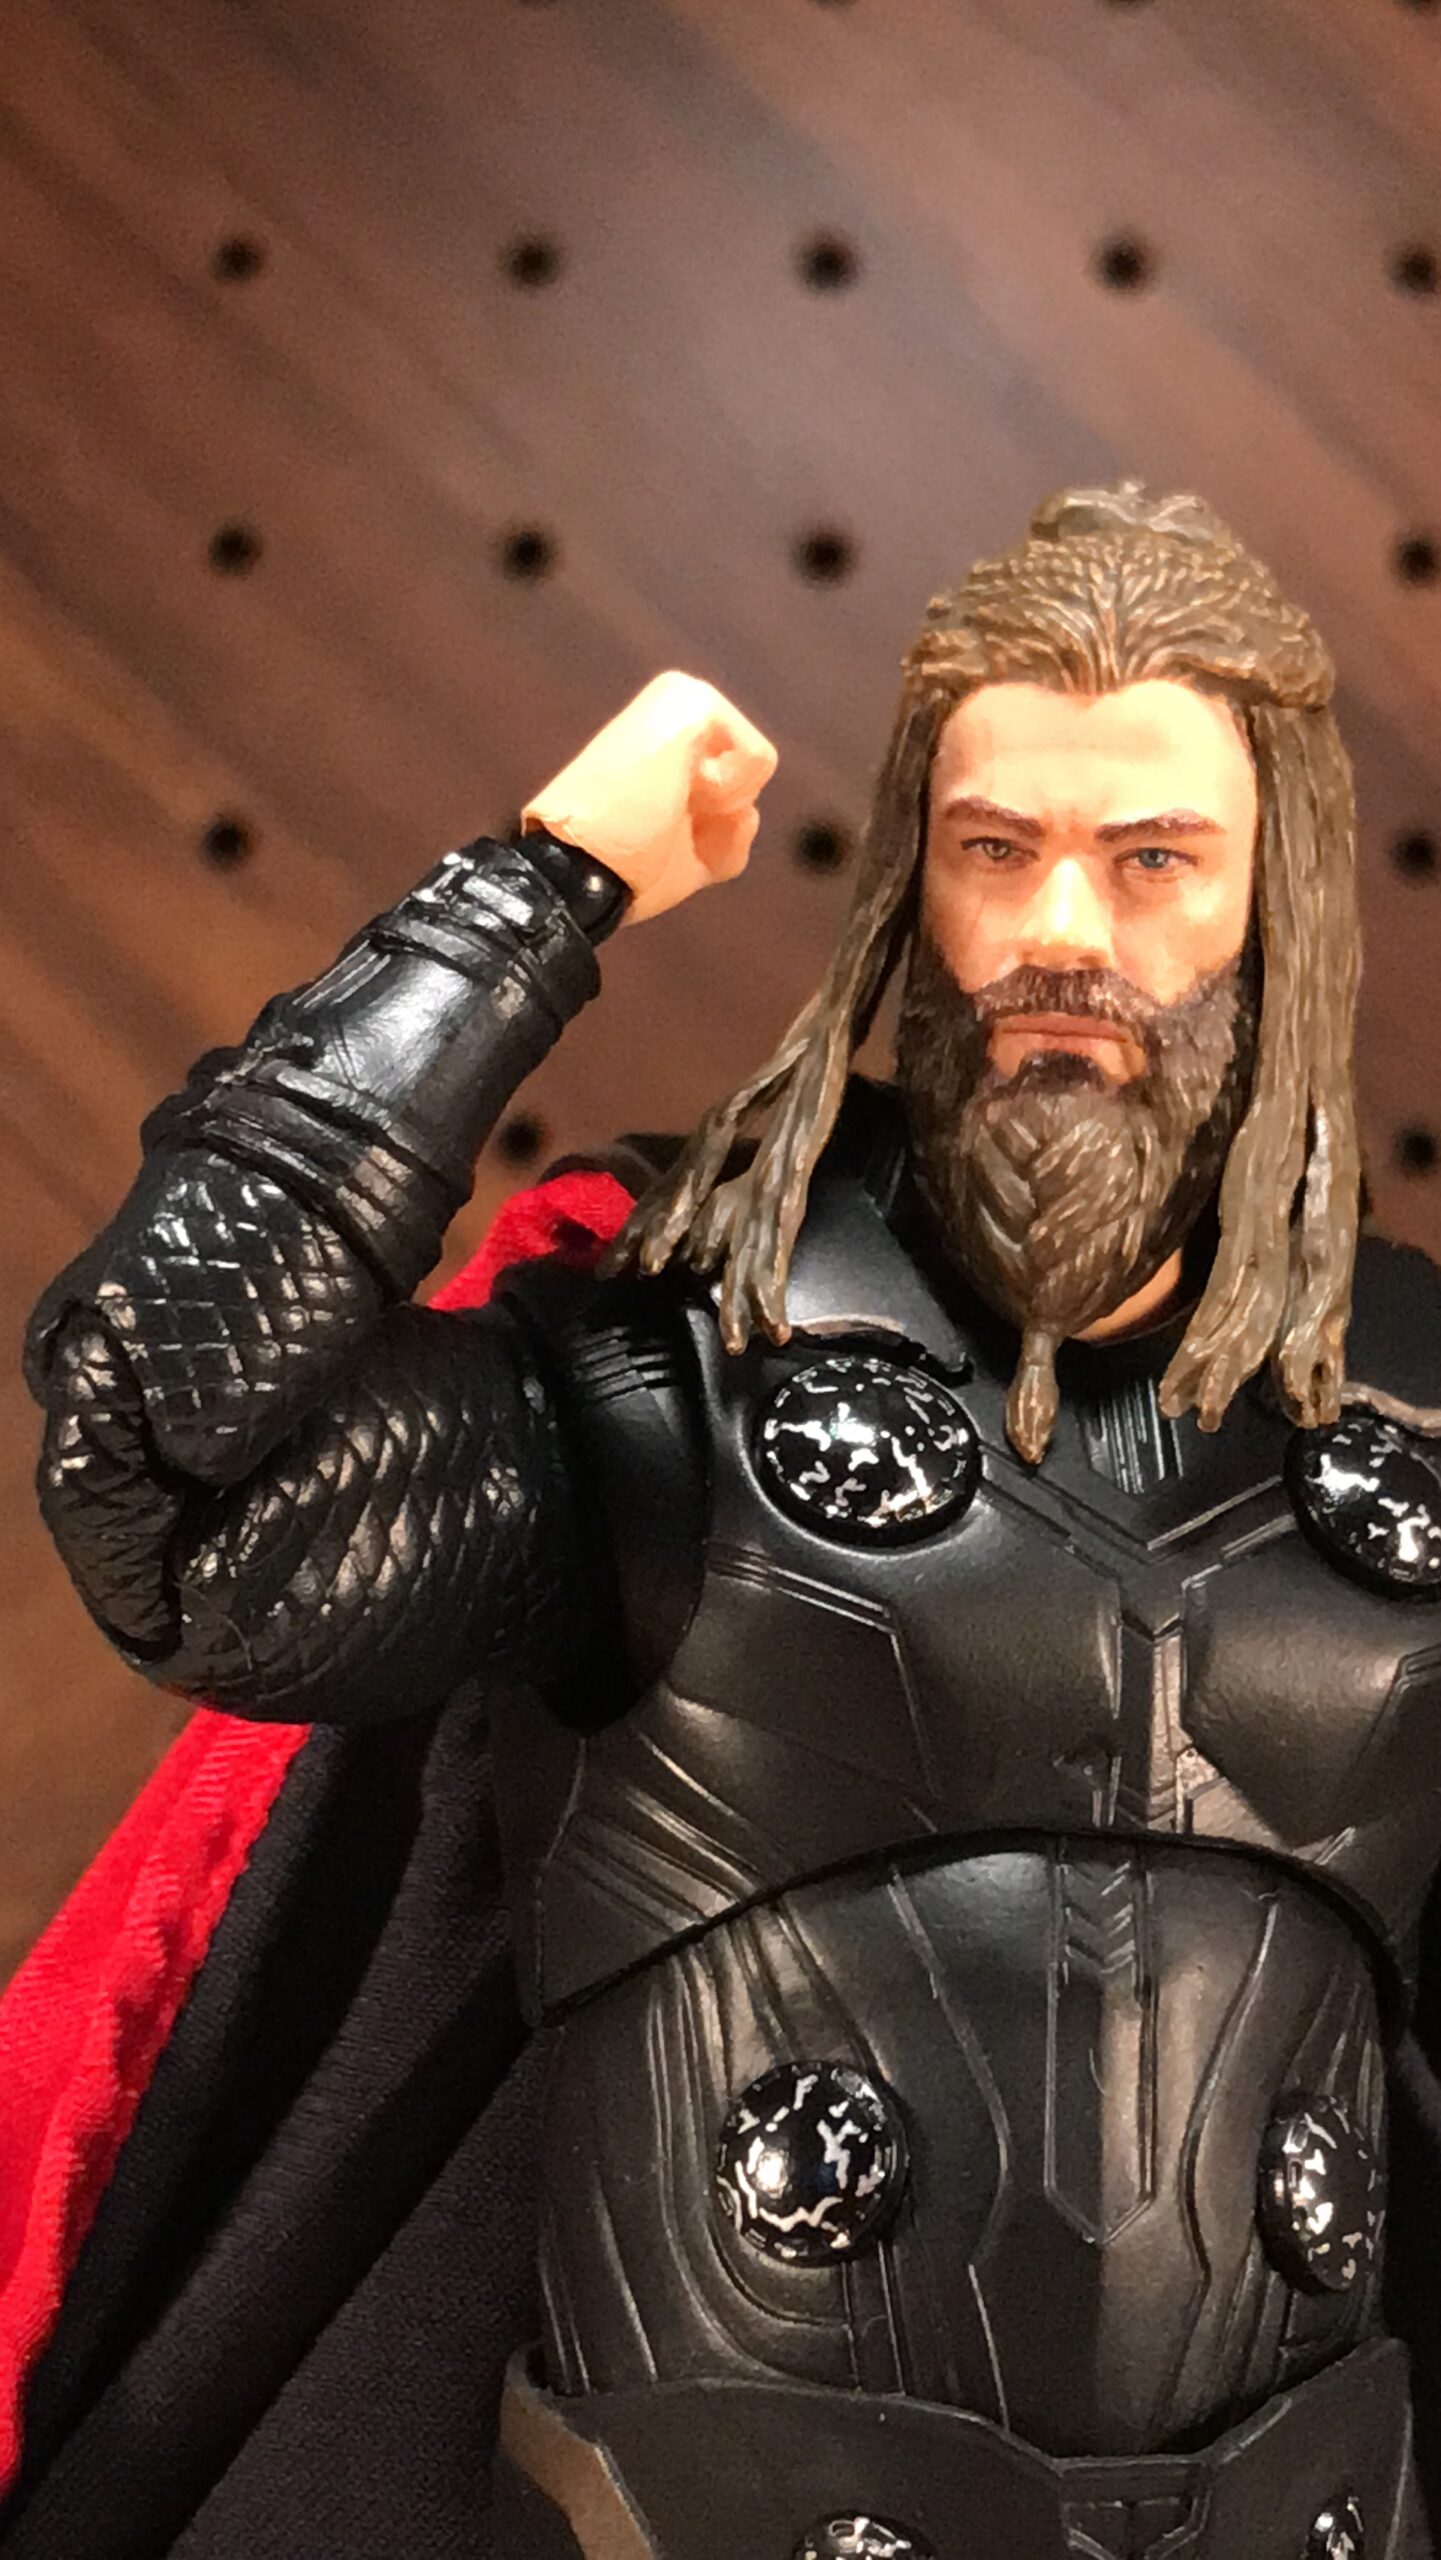 MAFEX ソー (アベンジャーズ エンドゲームver.)レビュー | Toys.Time 